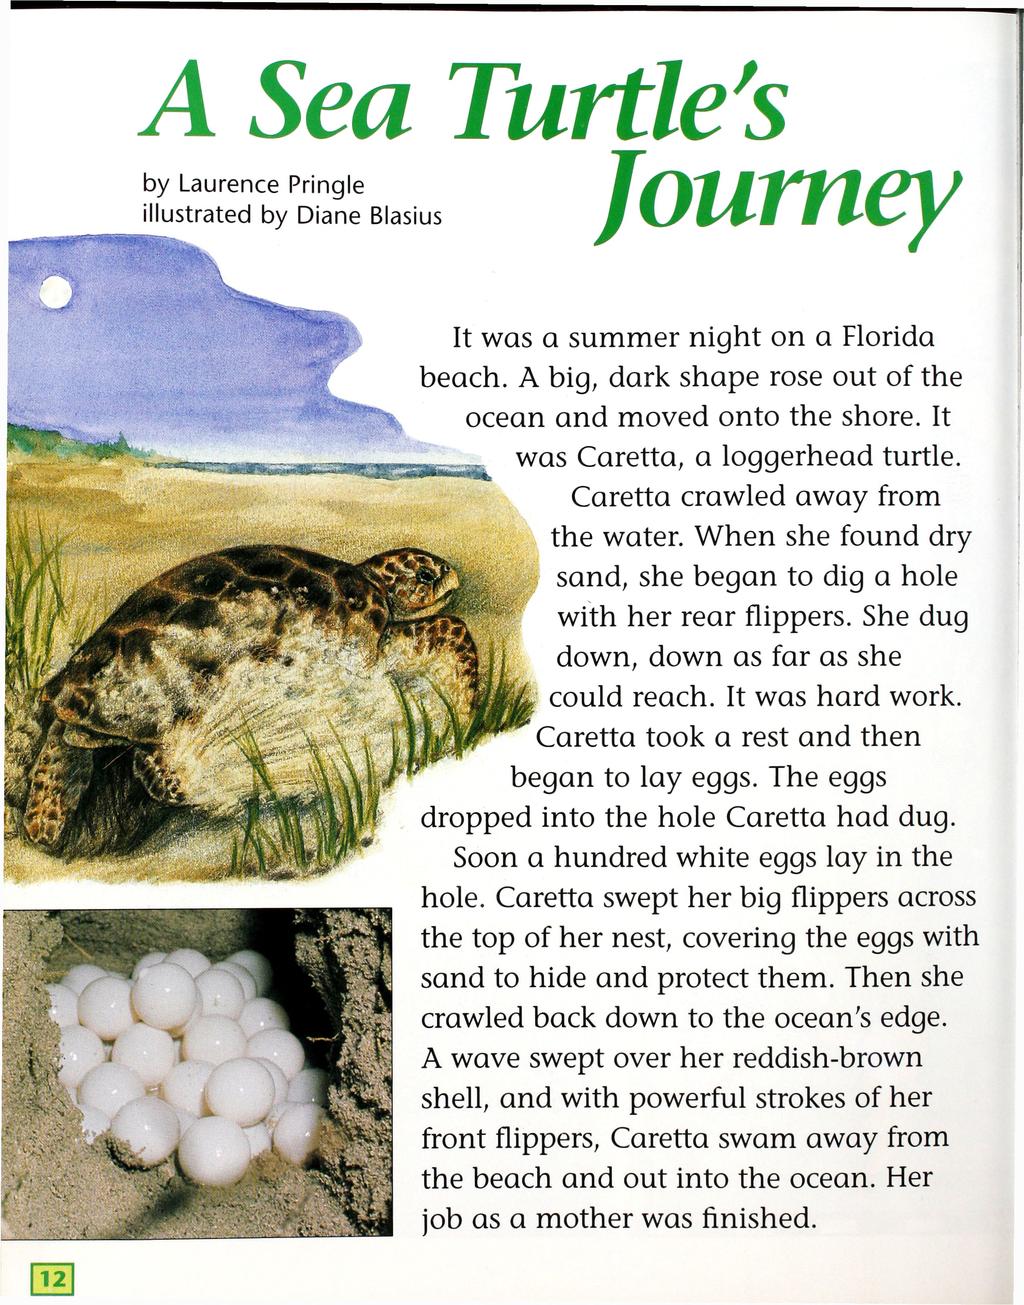 A Sea Turtle's by Laurence Pringle illustrated by Diane Blasius It was a summer night on a Florida beach. A big, dark shape rose out of the ocean and moved onto the shore.